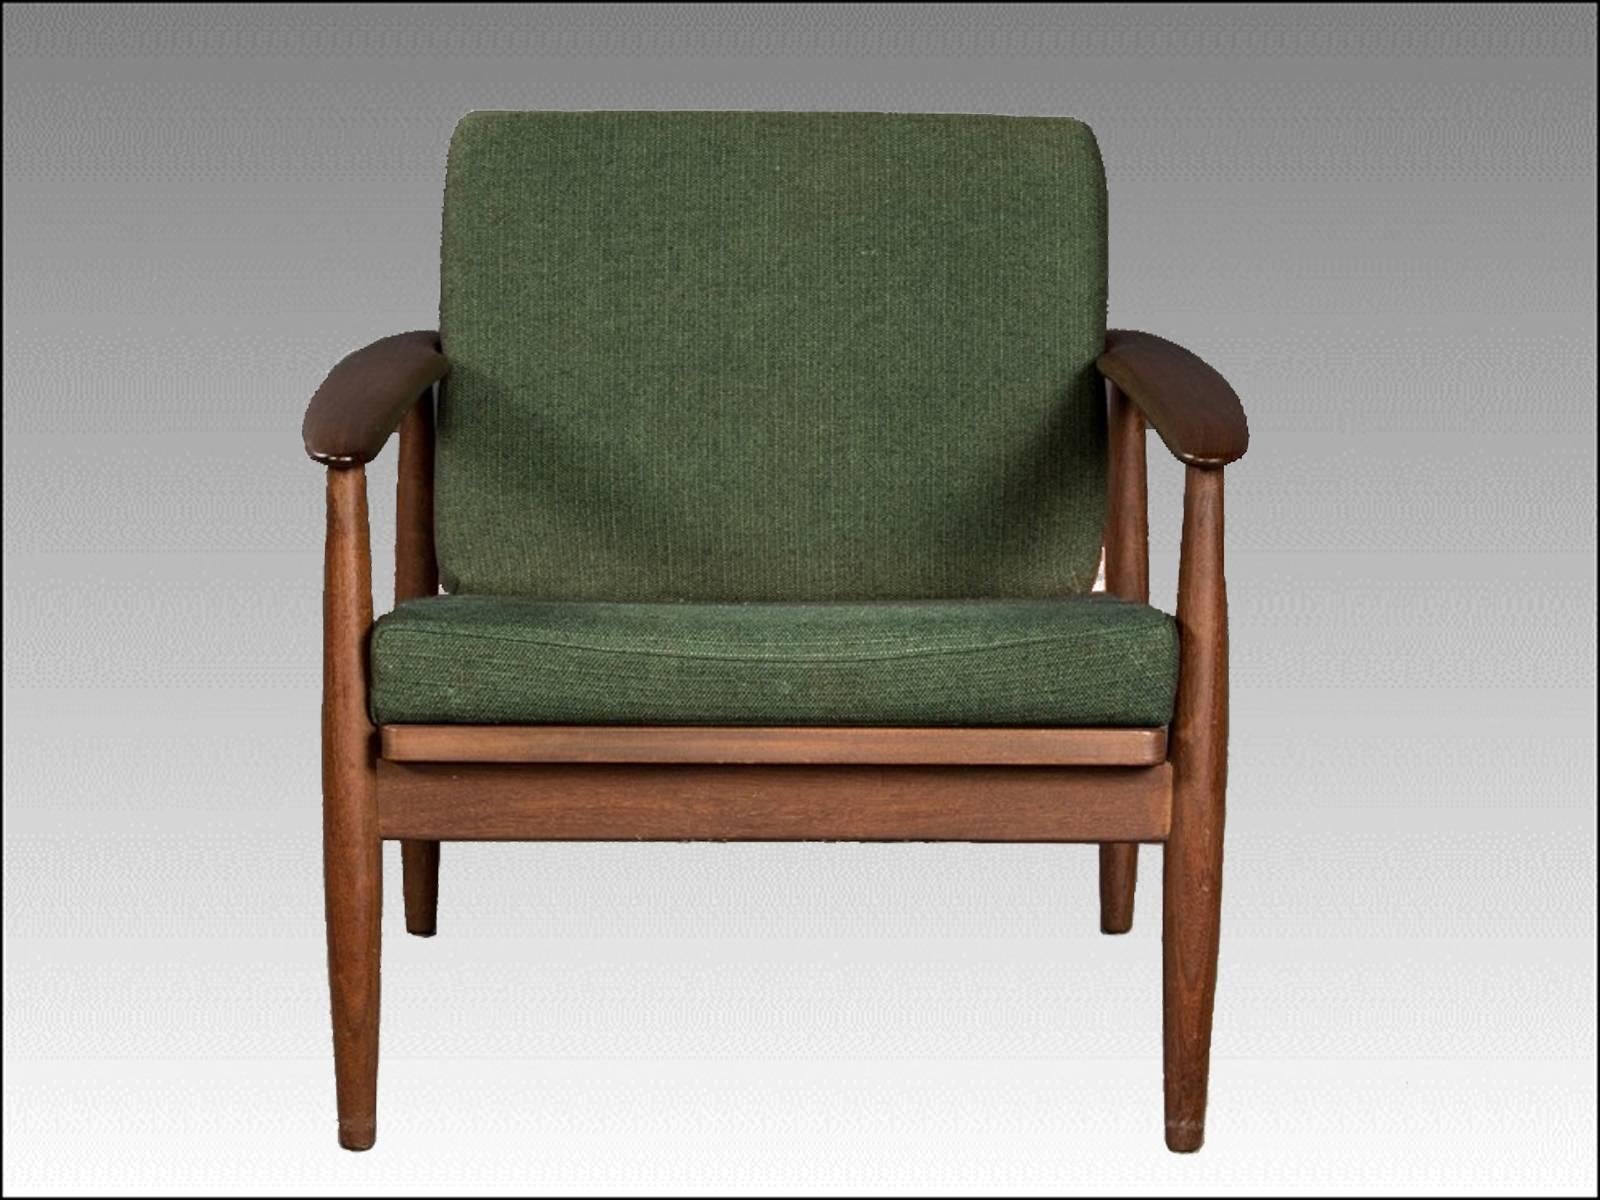 Scandinavian Modern 1960s Grete Jalk Style Sofabed and Armchair in Teak and Green Fabric